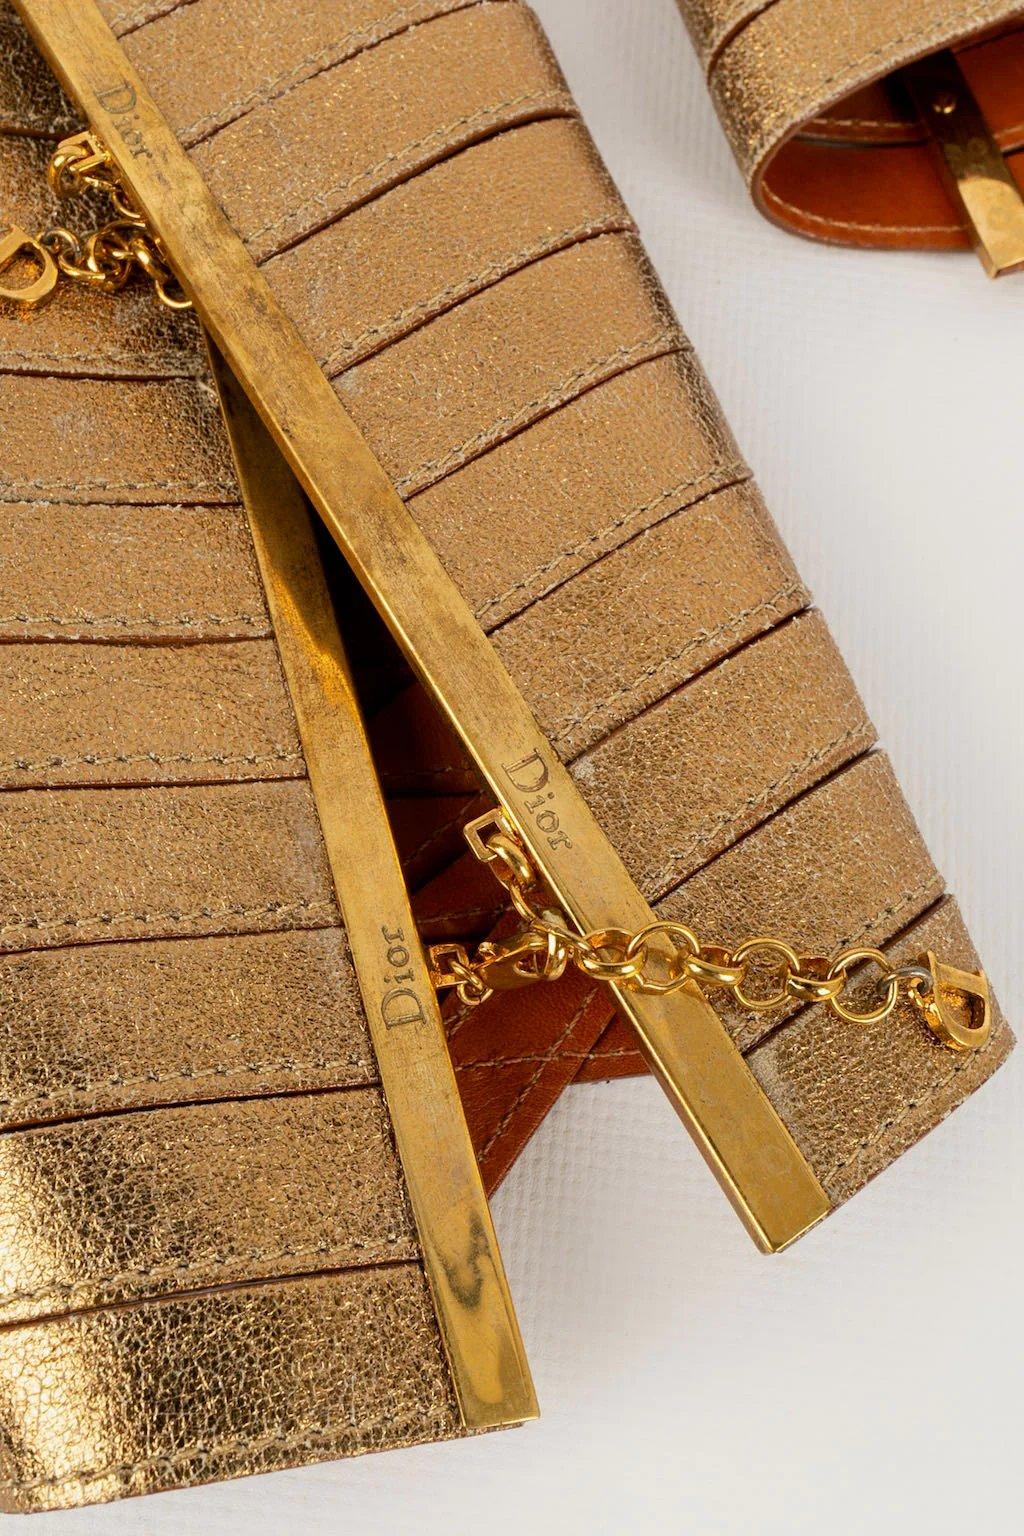 Christian Dior Pairs of Arm/Leg Bracelets in Crossed Golden Leather Bands In Excellent Condition For Sale In SAINT-OUEN-SUR-SEINE, FR